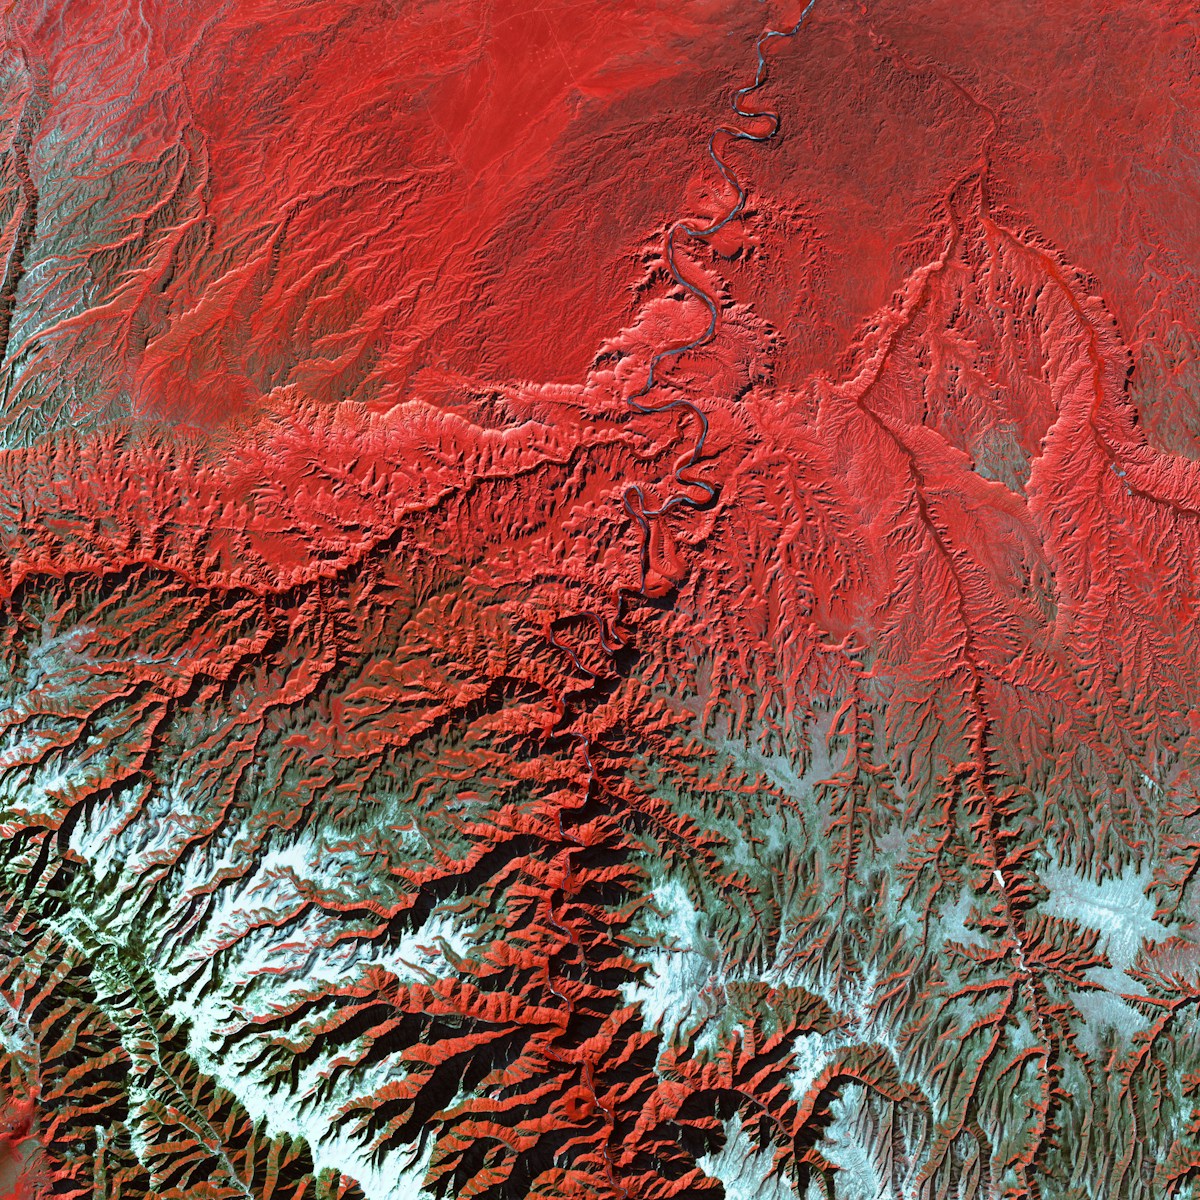 a satellite image of a red mountain range